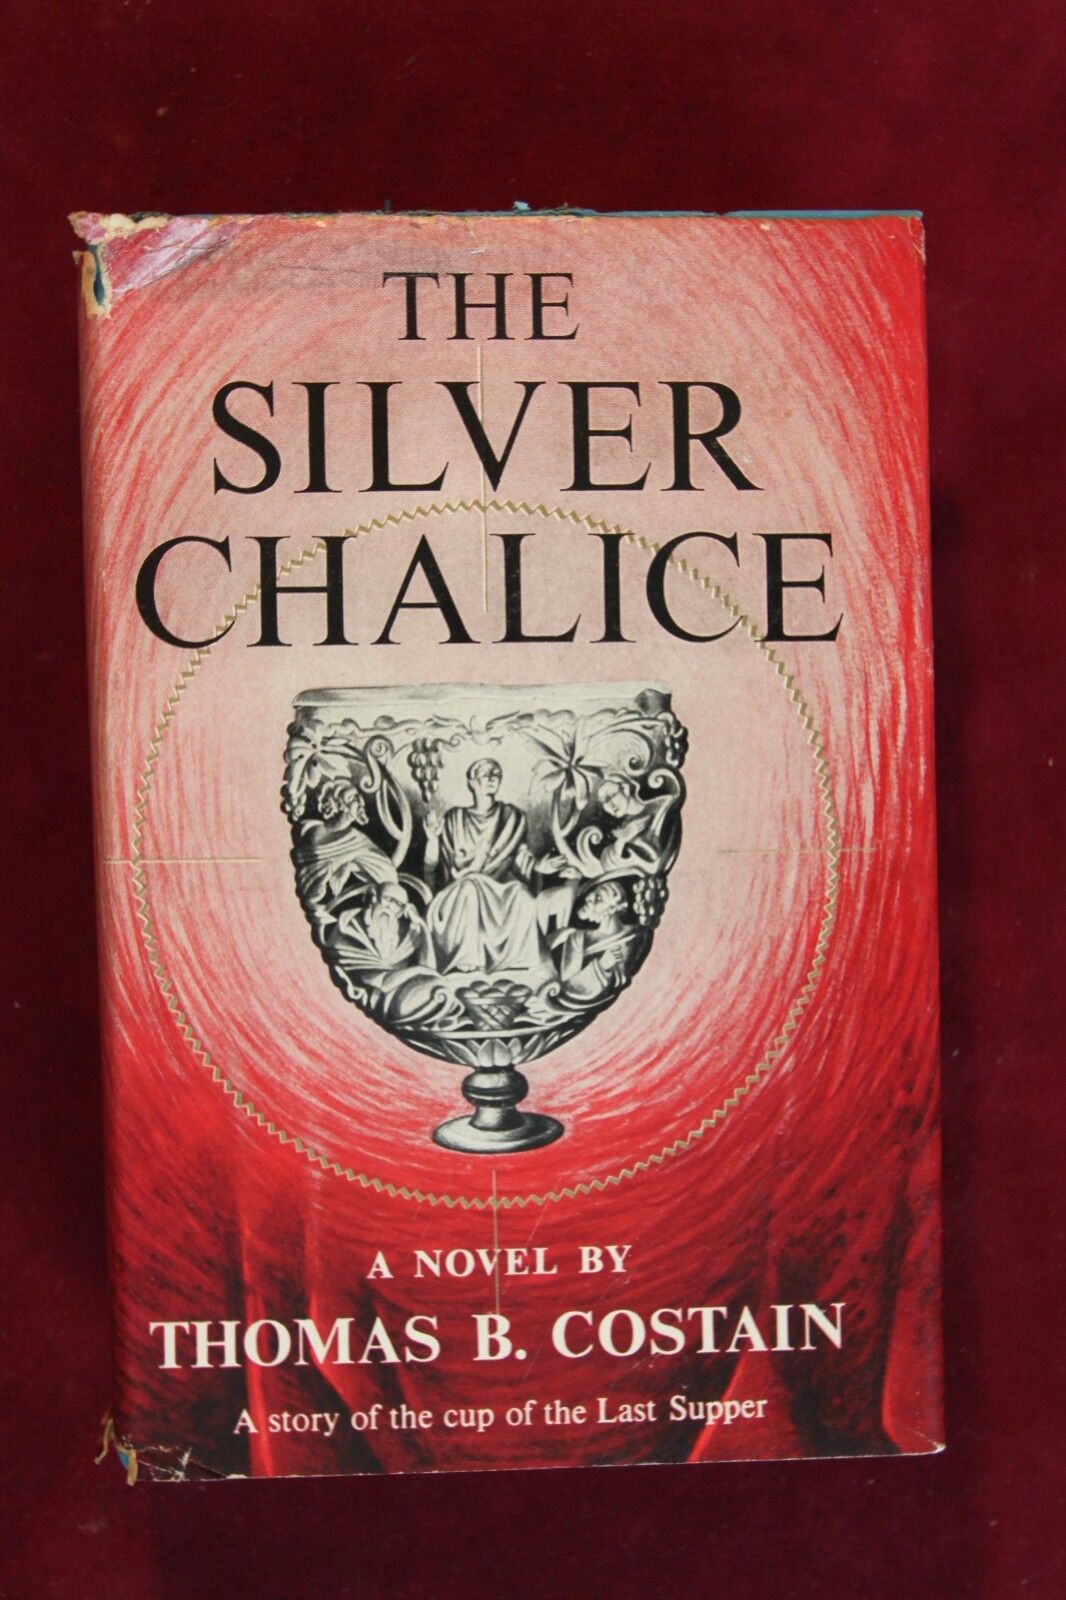 THE SILVER CHALICE BY THOMAS B. COSTAIN   COPYRIGHT 1952